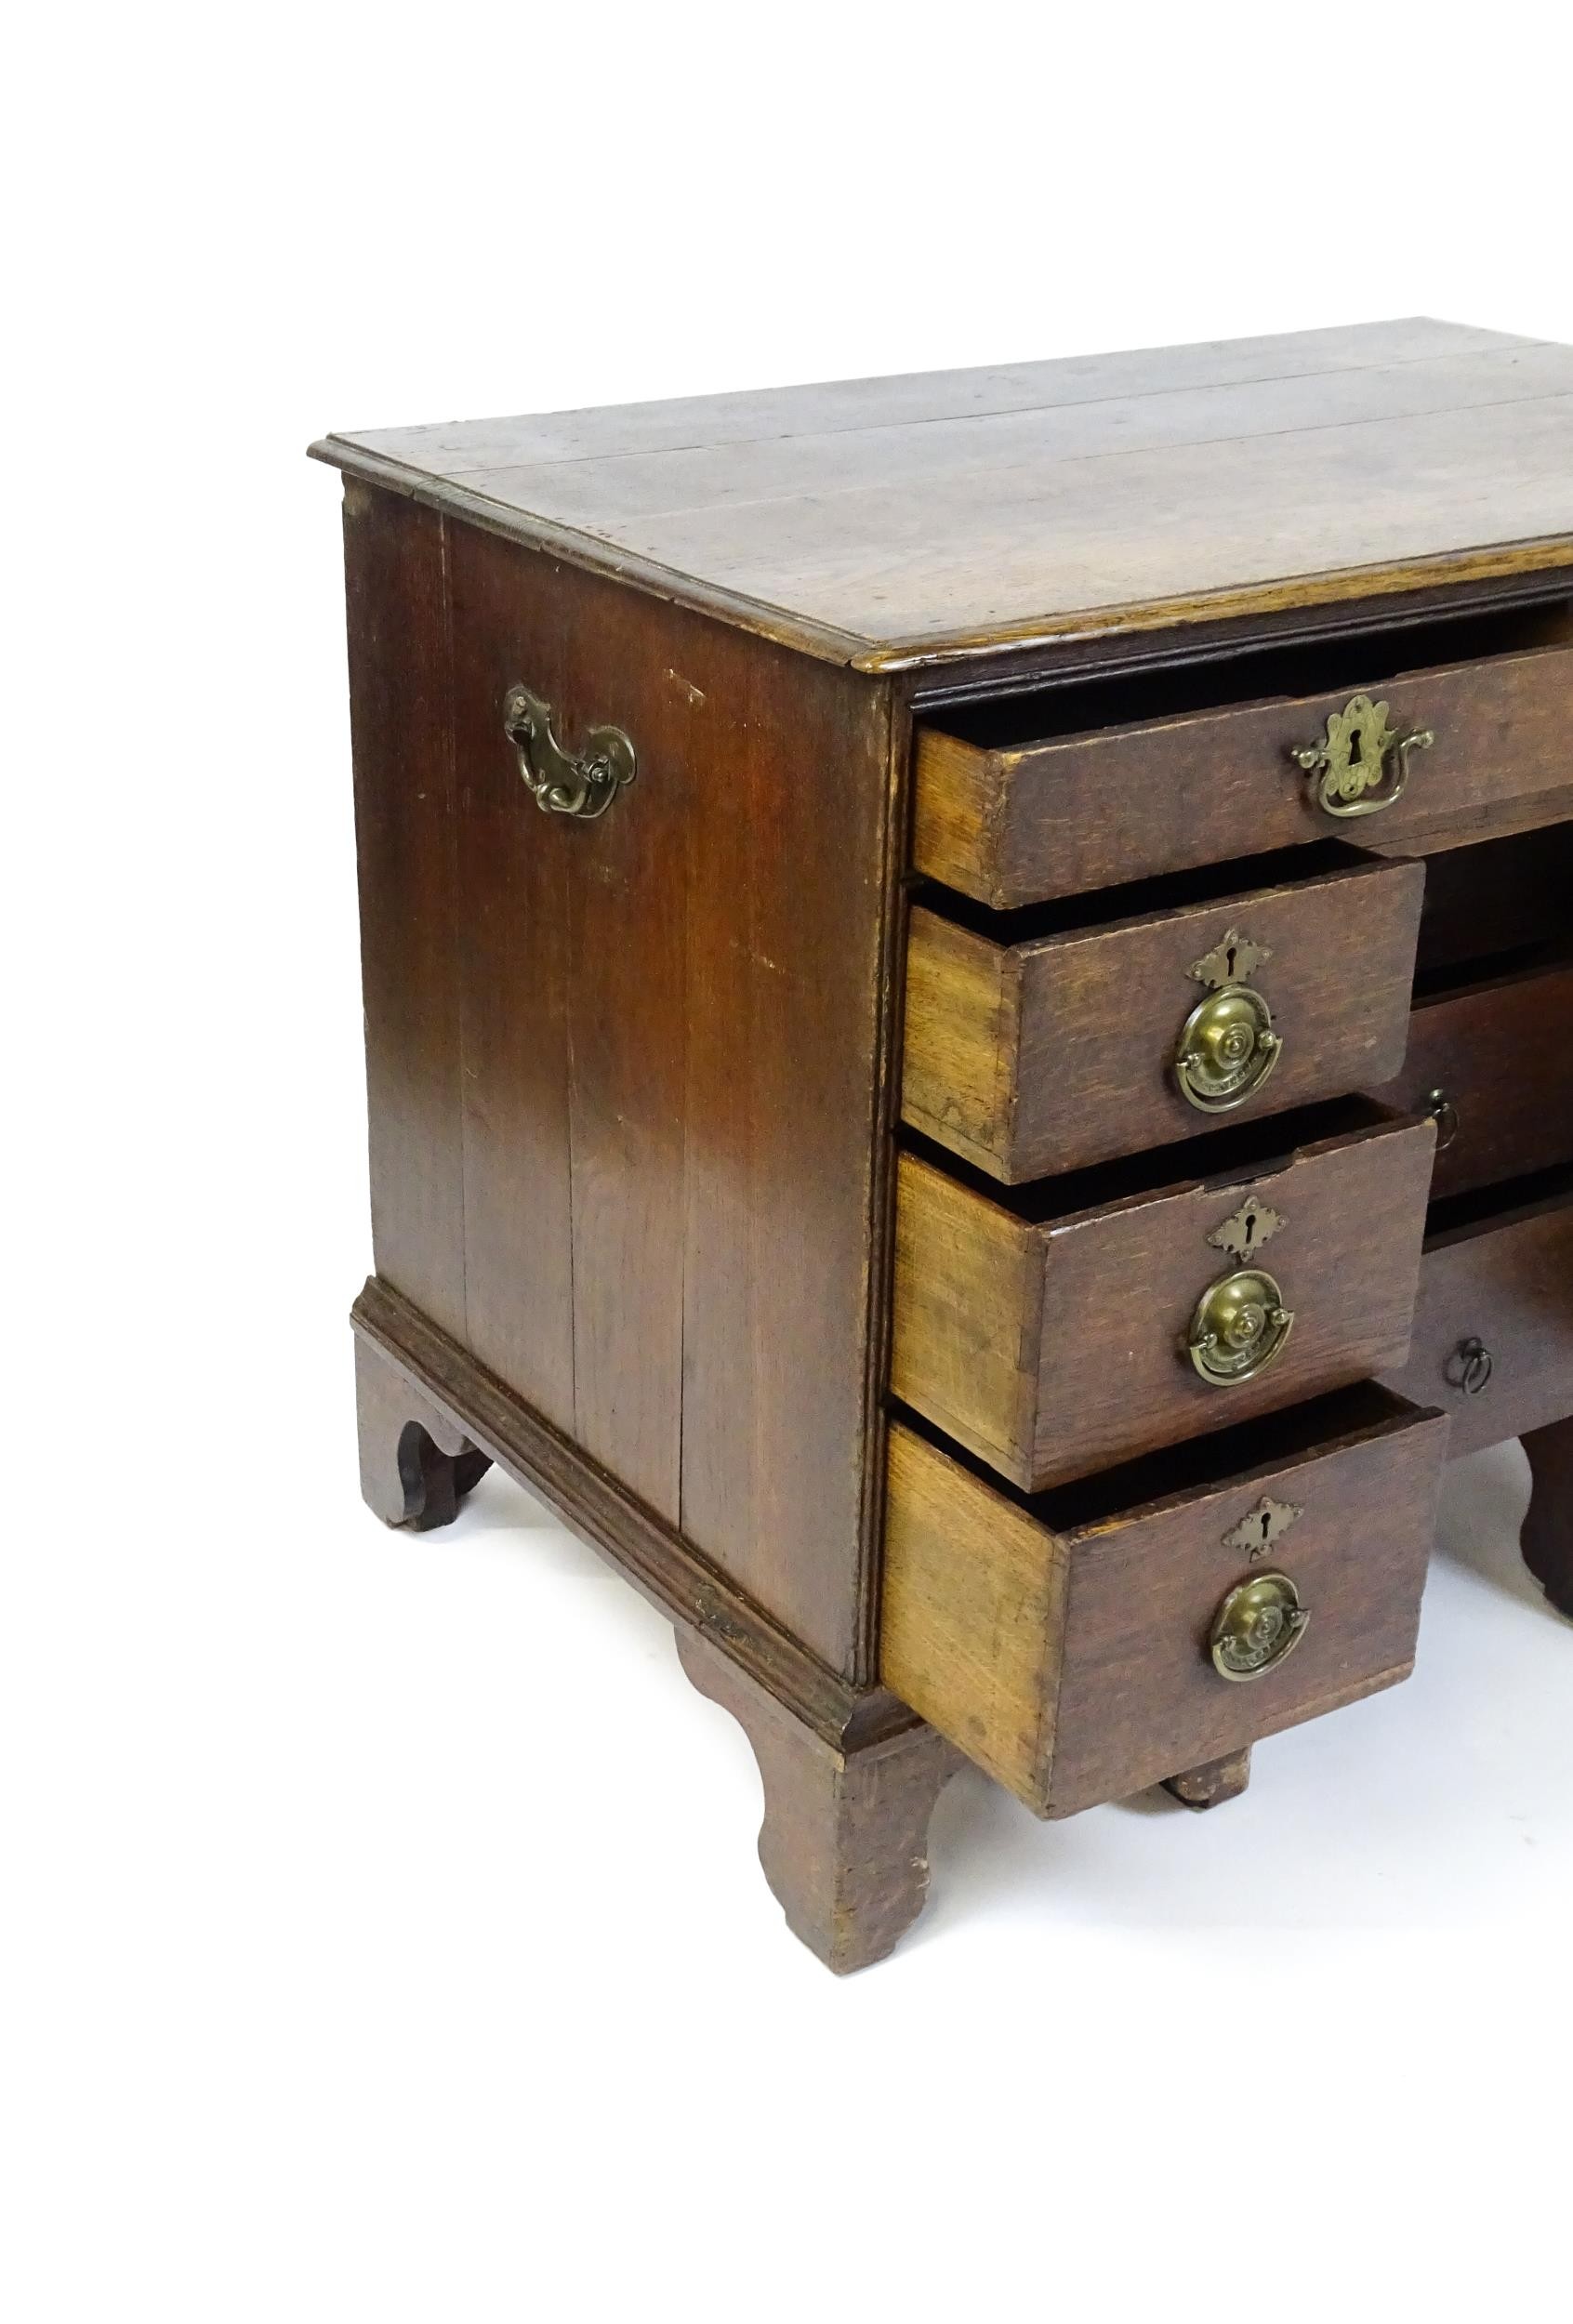 An early / mid 18thC oak kneehole desk with a moulded top above two short drawers and two banks of - Image 4 of 10